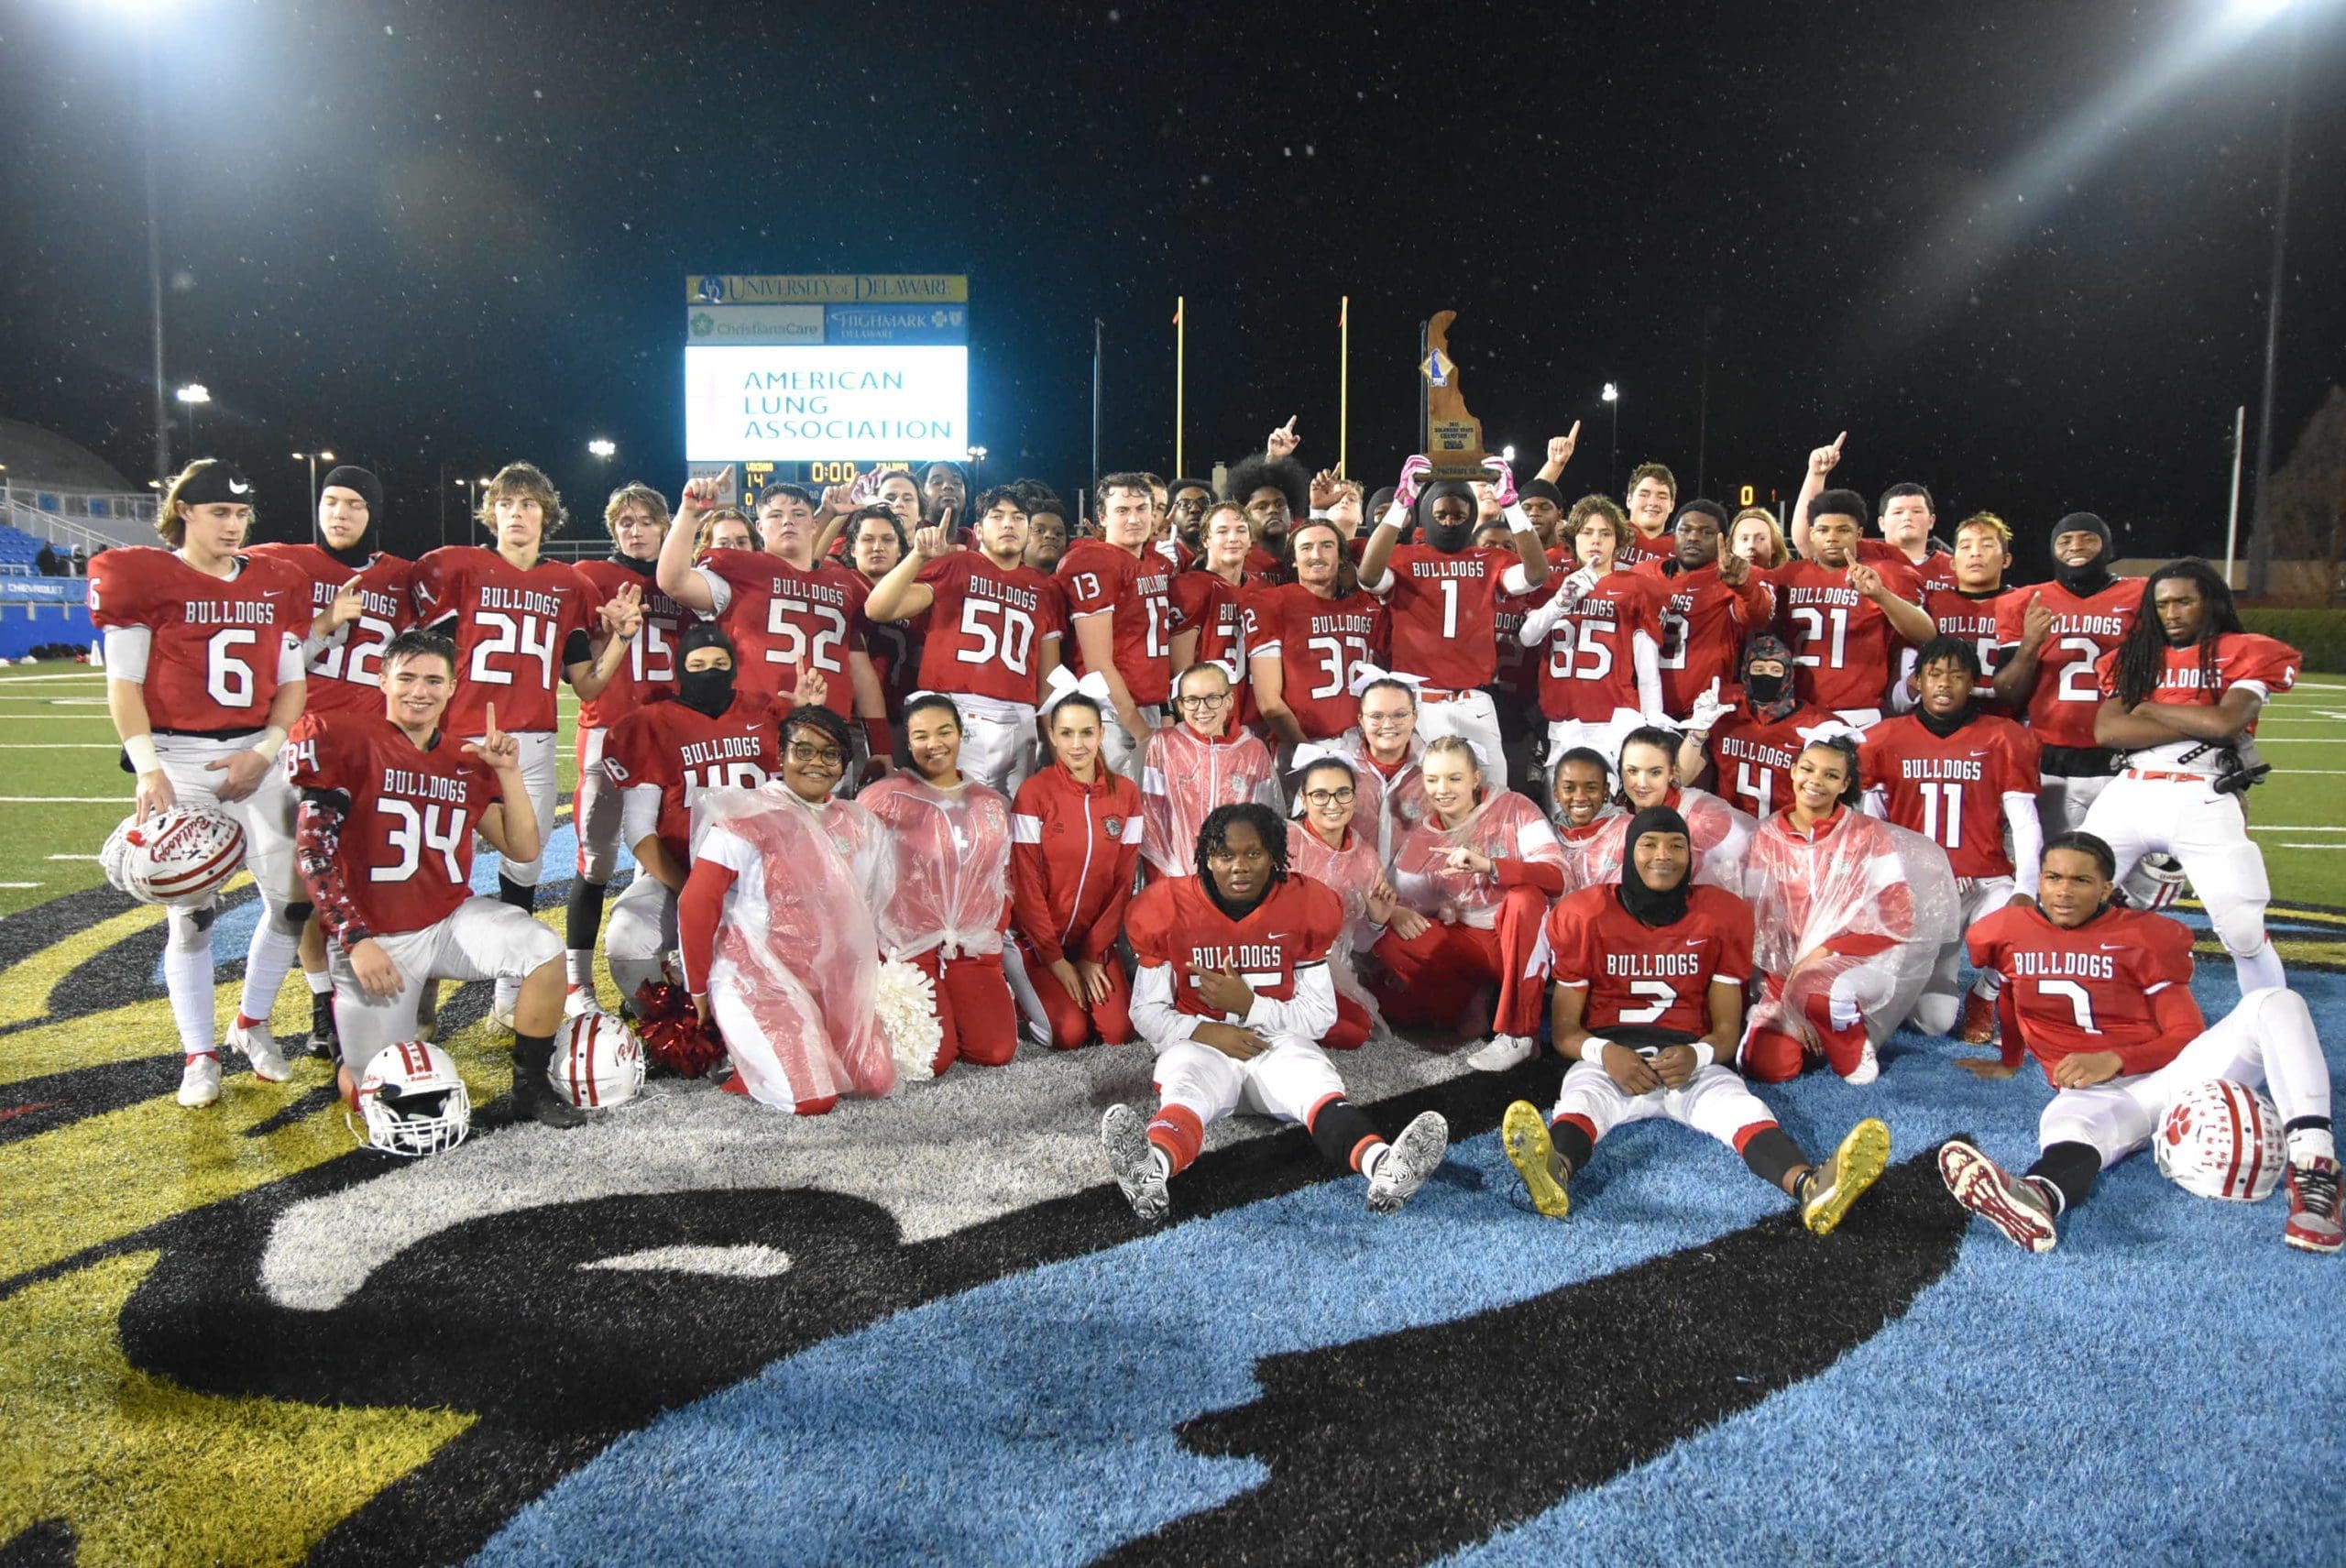 Featured image for “Laurel wins 4th state championship with victory over St. Elizabeth”